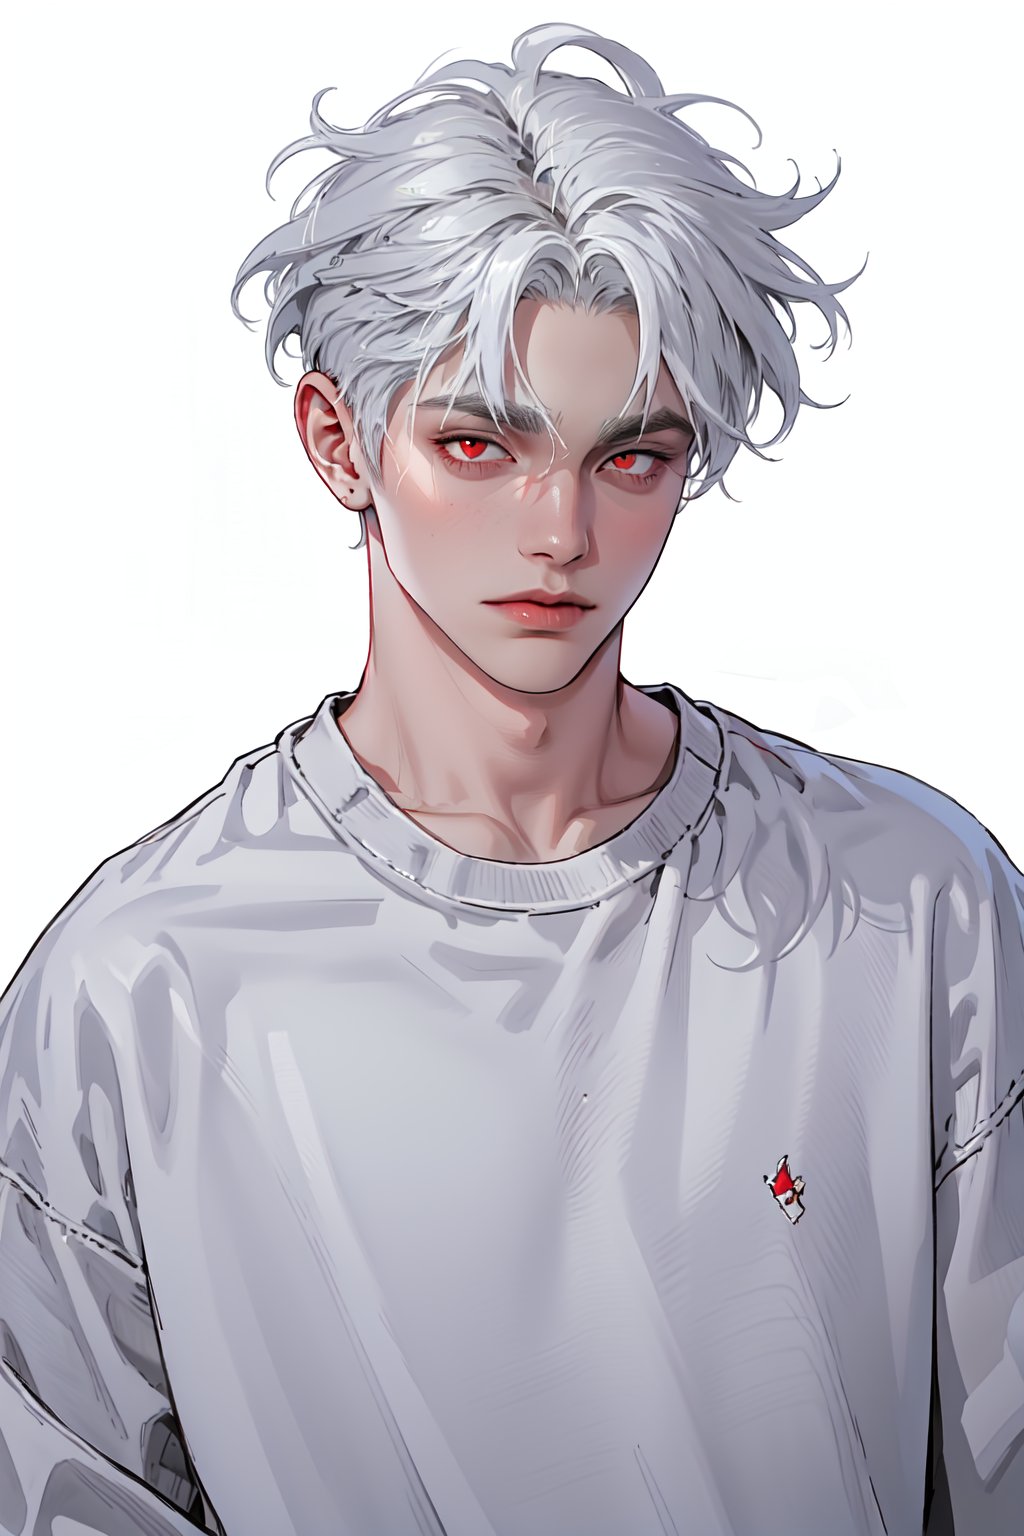 man with white haired and red eyes and wolfcut haired using grey crewneck in white background